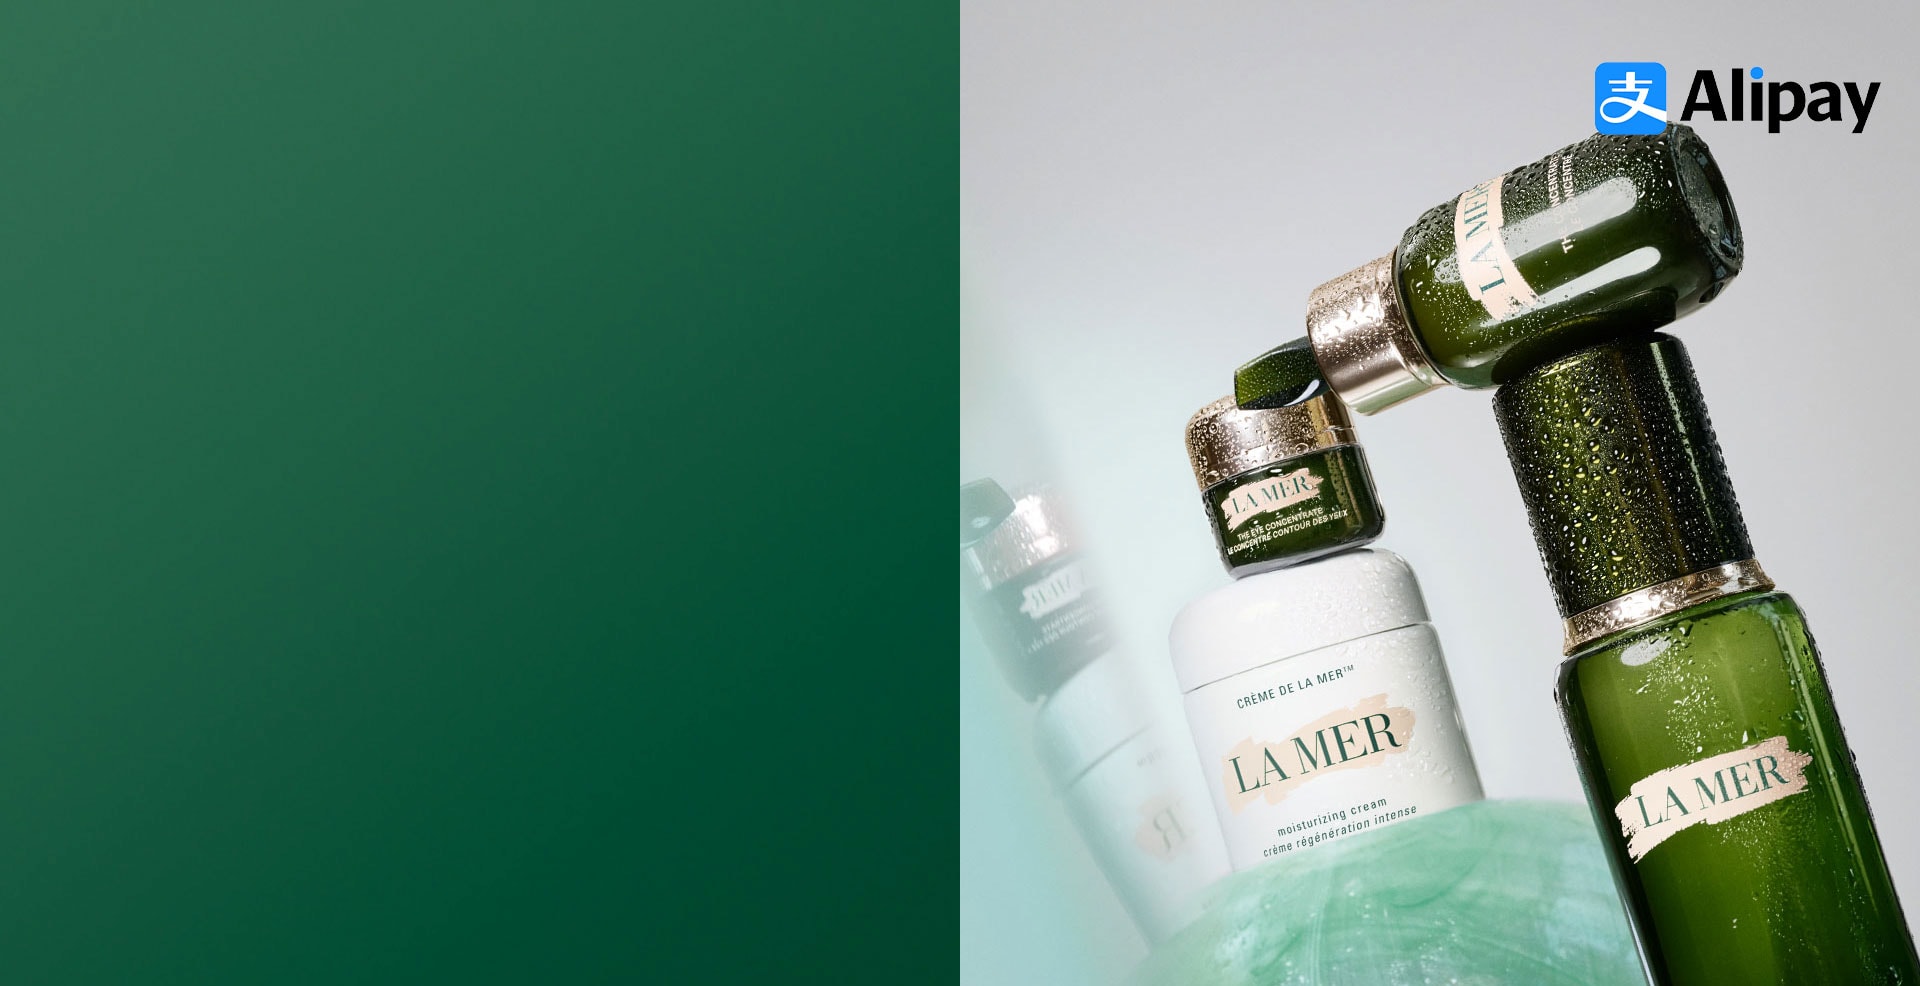 Bestselling La Mer products dynamically placed on concrete sculpture